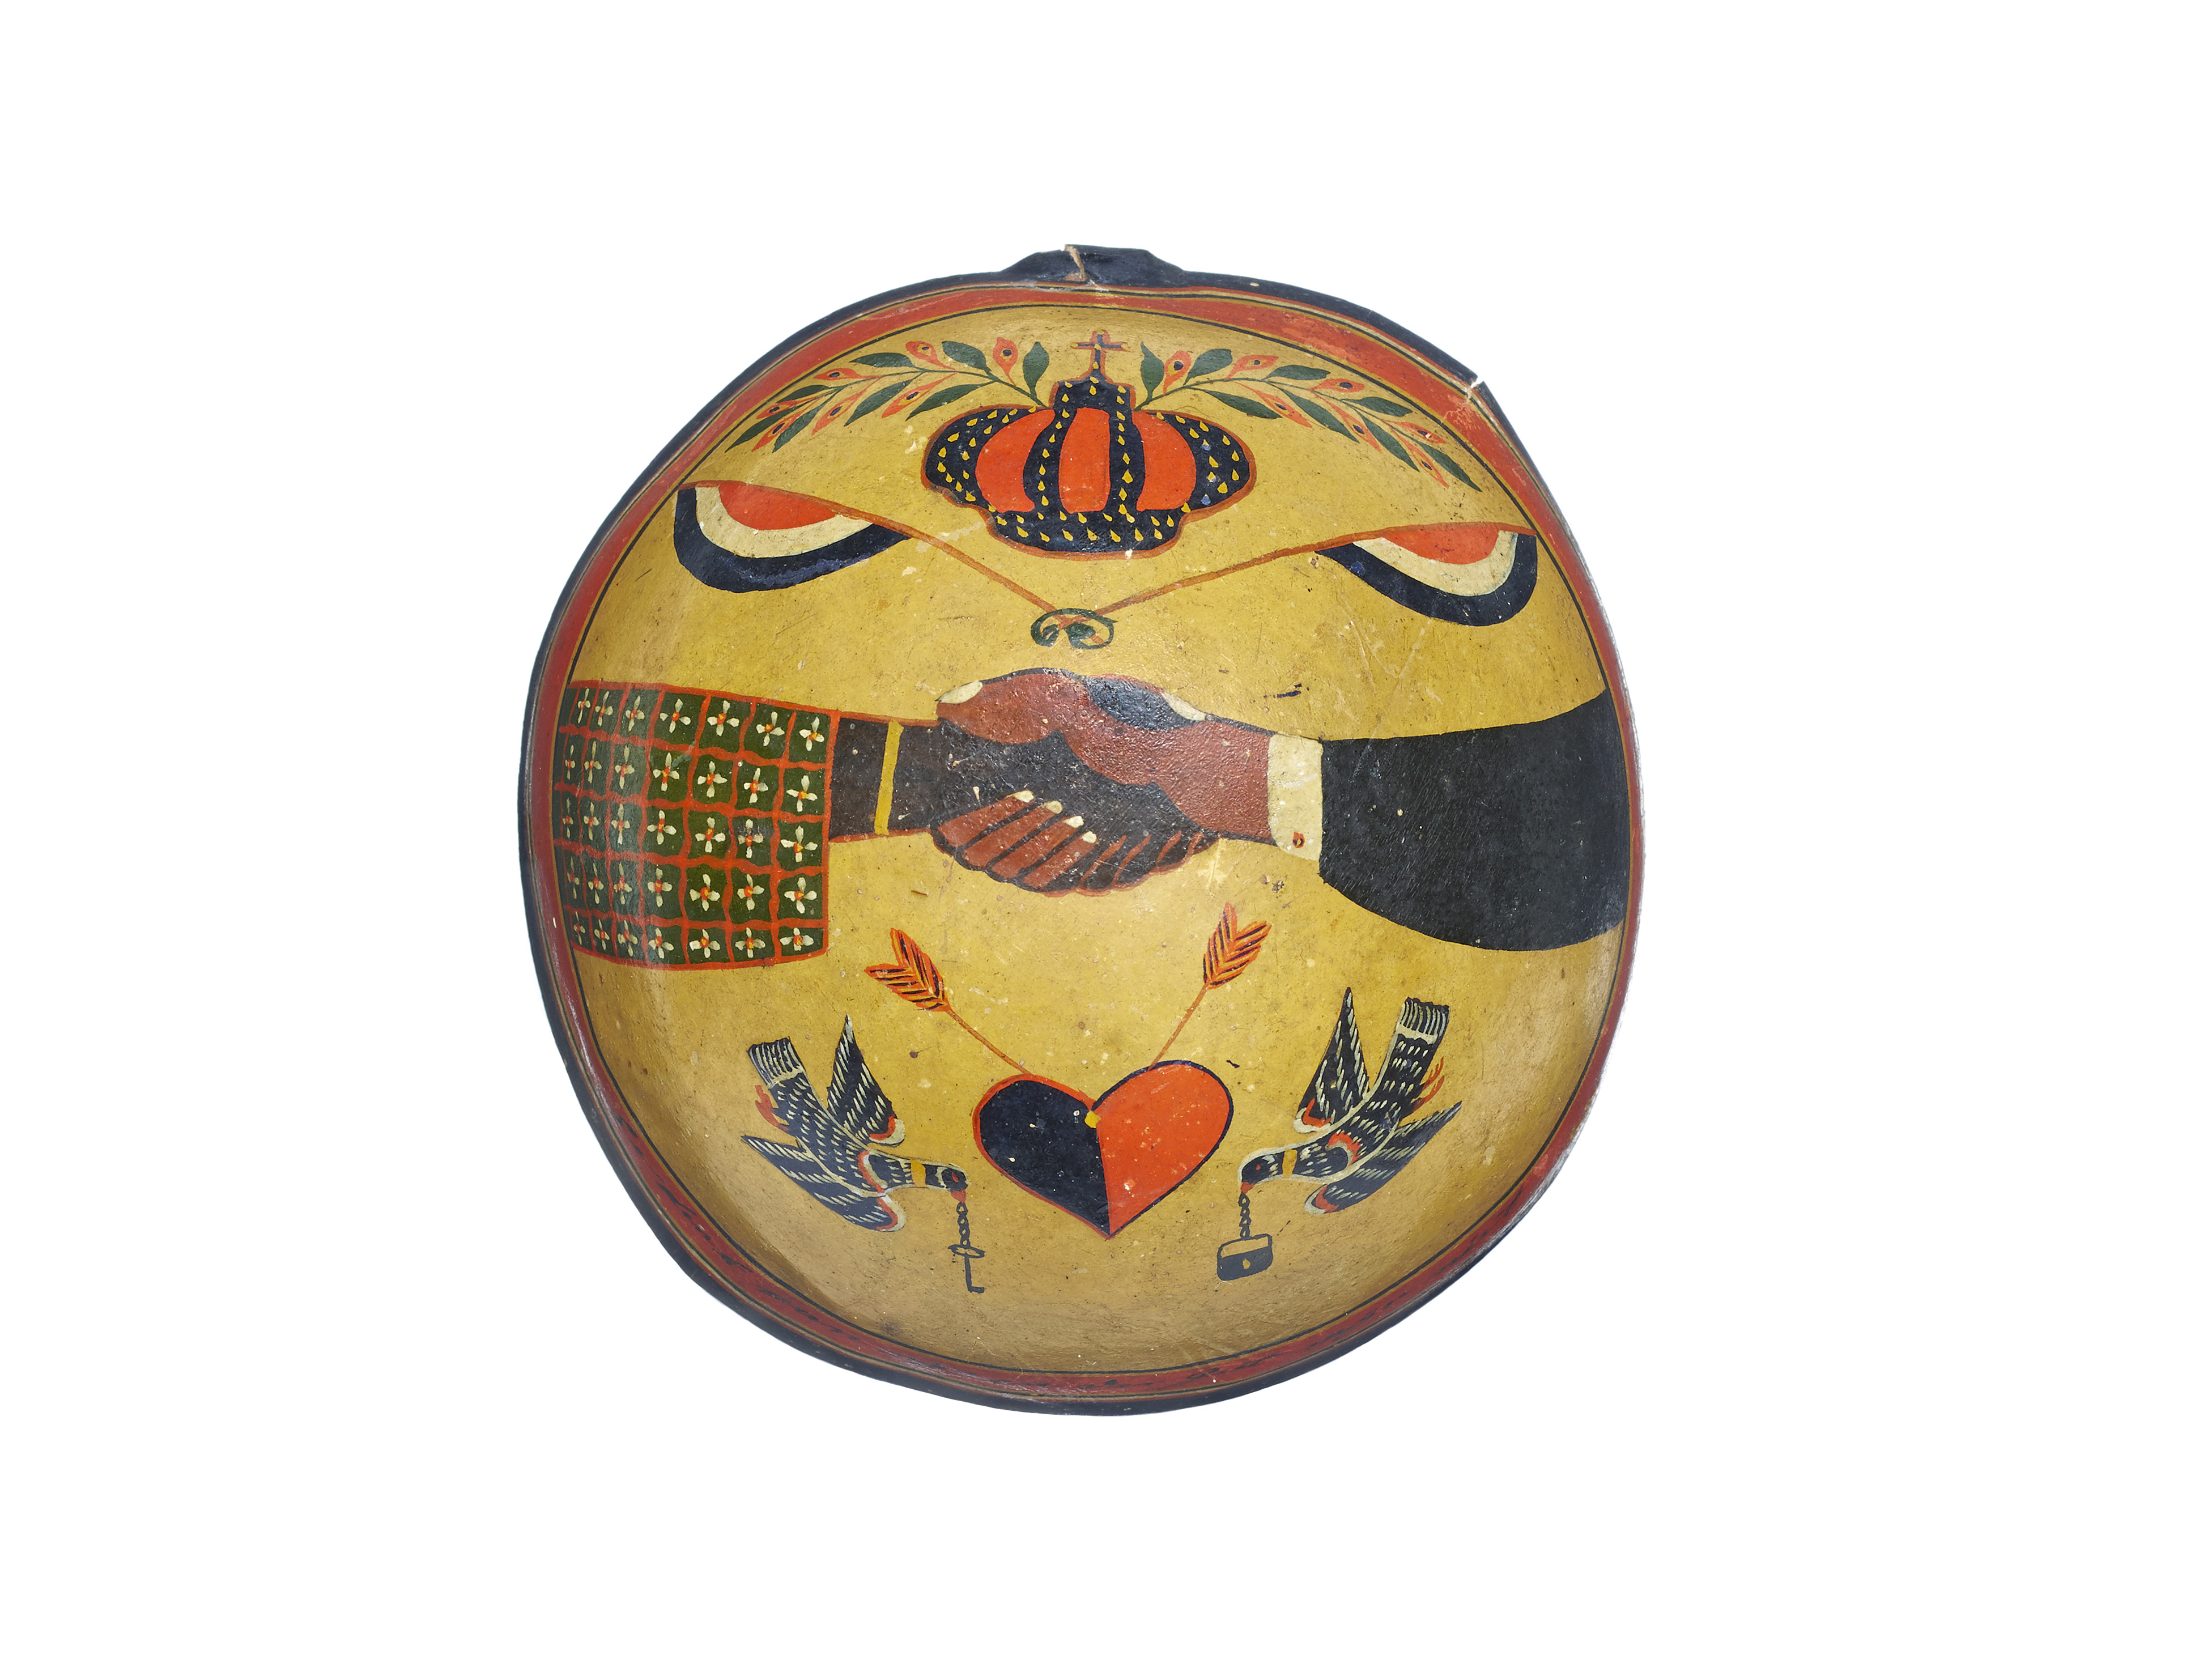 Decorative calabash (Suriname, late 19th century), one of the objects showcased in the Geneva exhibition. Donated in 1905 by Pauline and Marie Micheli, widows respectively of Jean-Louis and his son Marc Micheli, both of whom were close to Geneva's Protestant elite and the Moravian missions; context of creation undocumented.